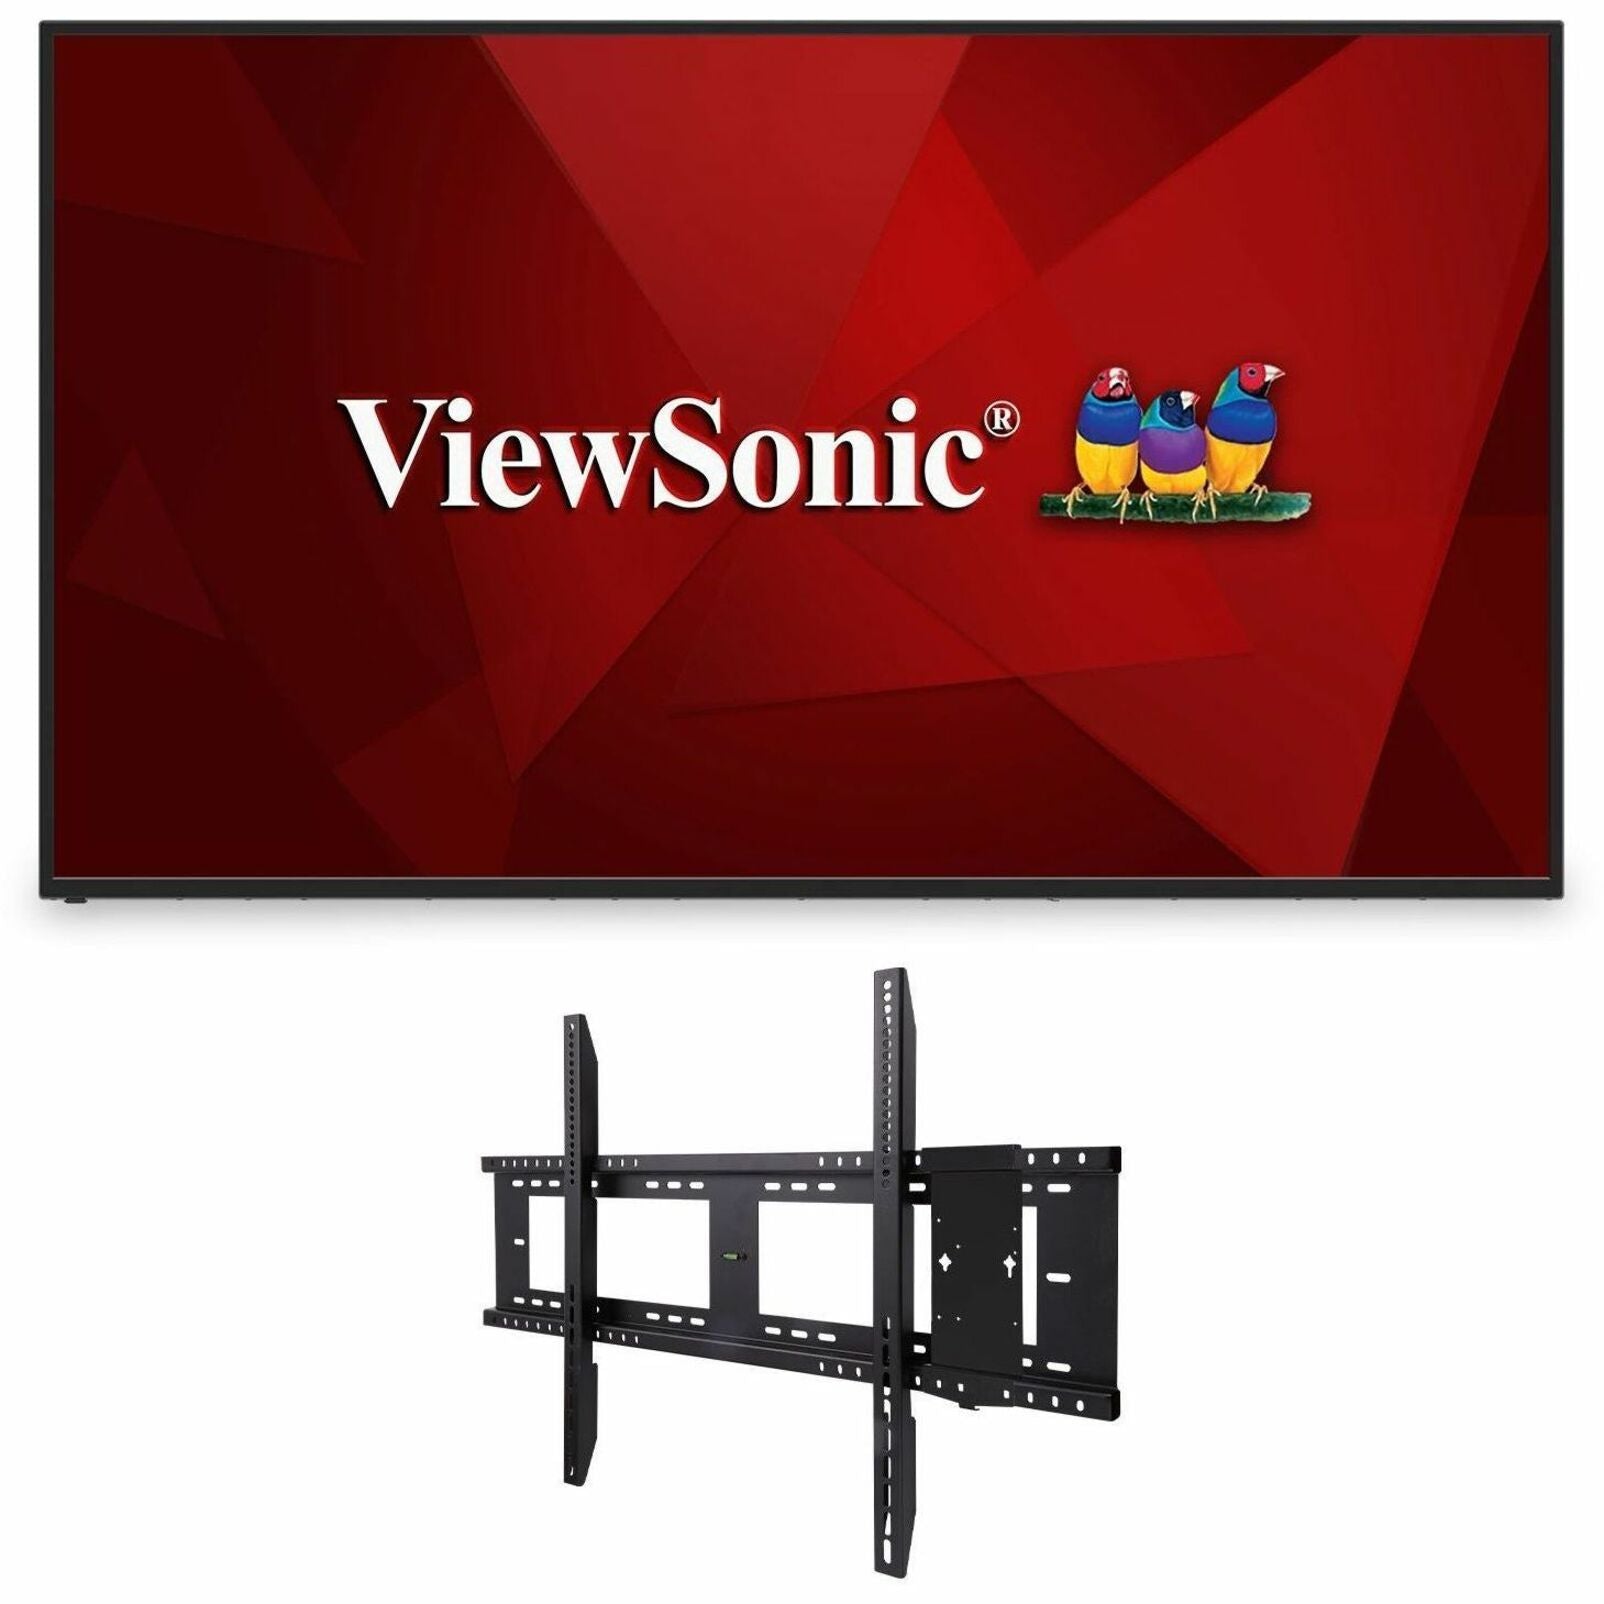 ViewSonic CDE6512-E1 Digital Signage Display - 4K, Integrated Software and Fixed Wall Mount